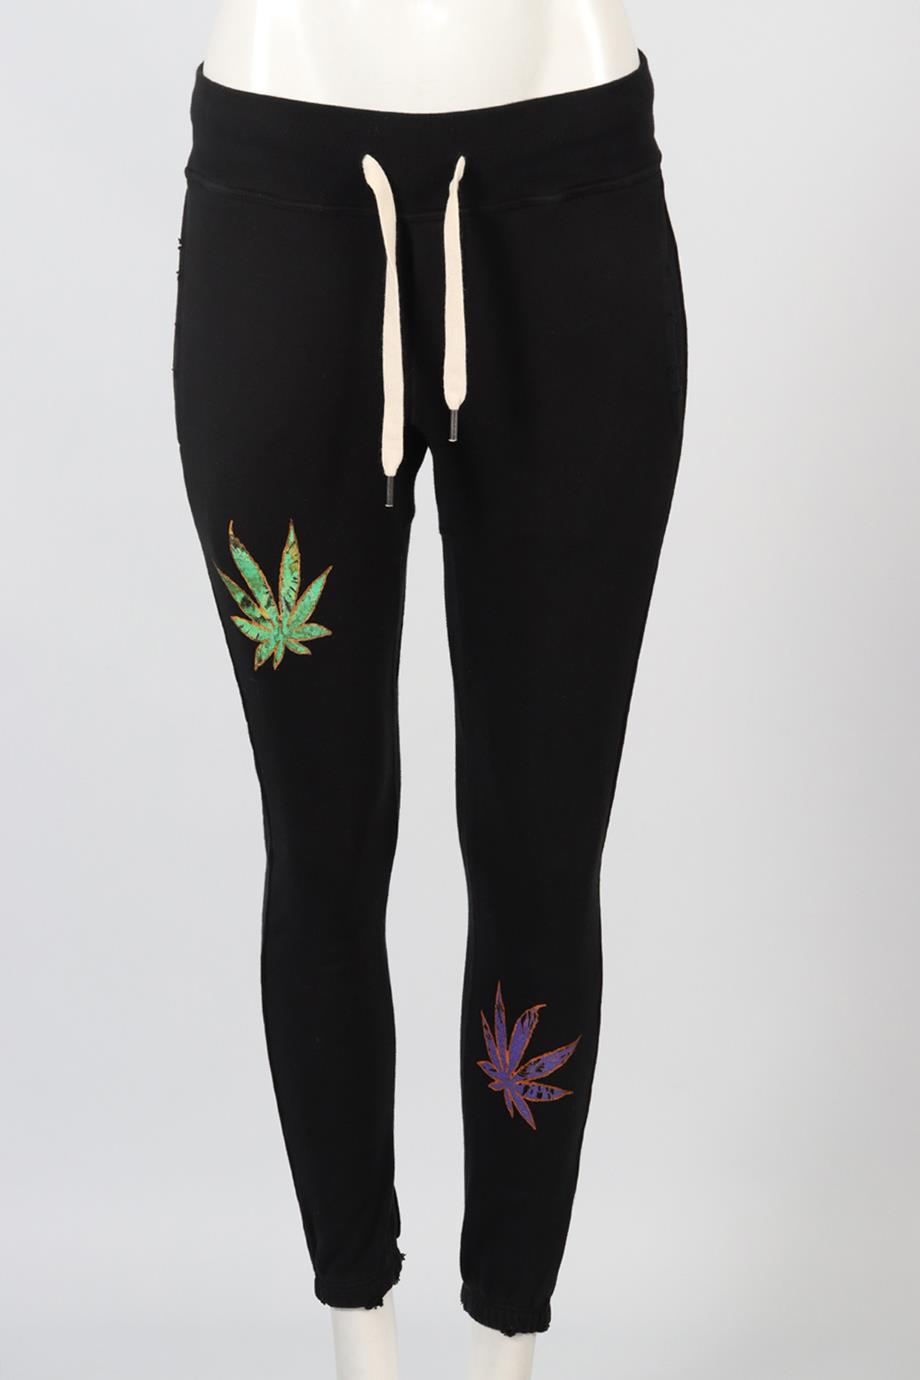 NSF + JACQUIE AICHE PRINTED COTTON TRACK PANTS XSMALL